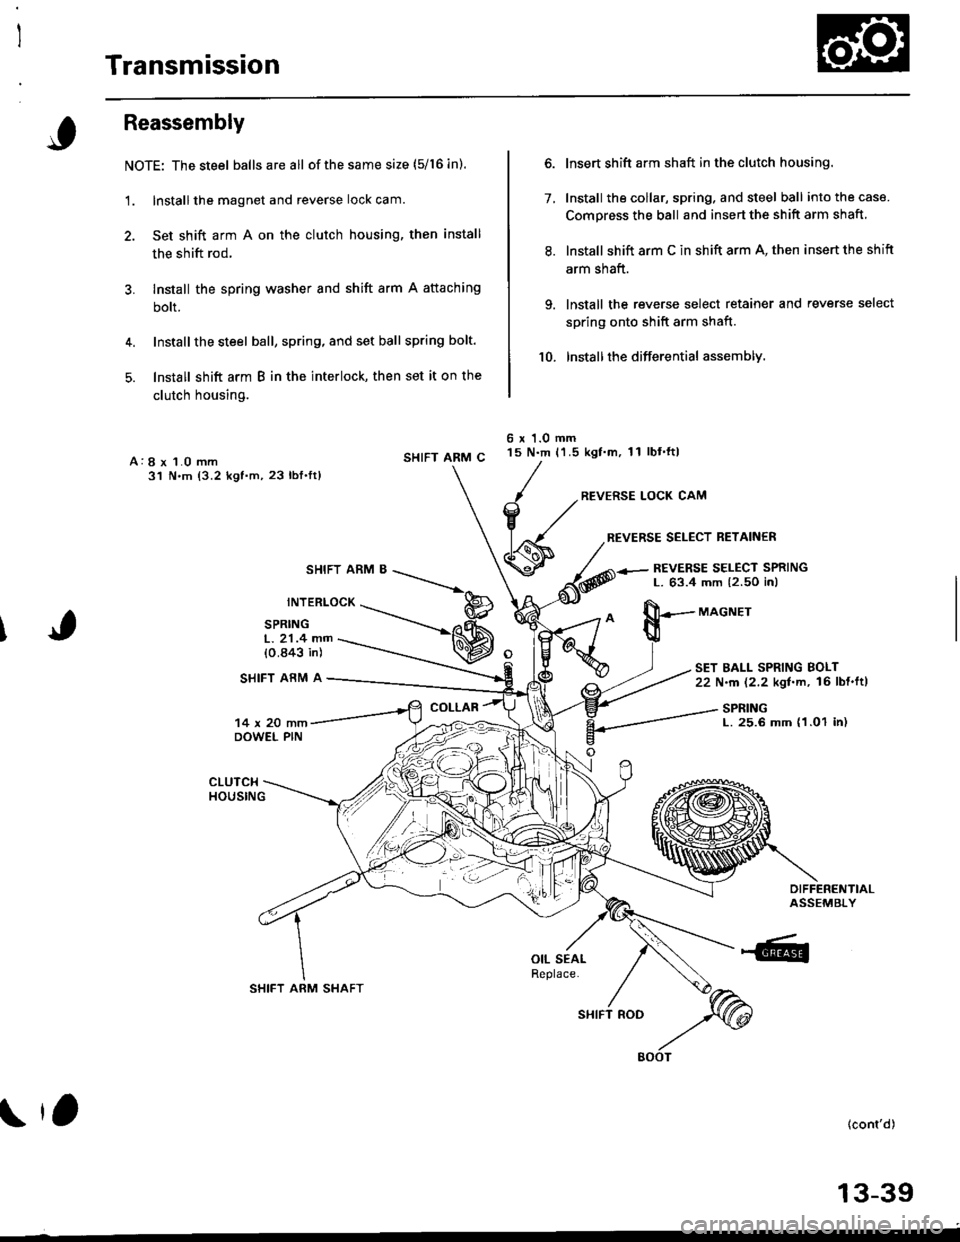 HONDA CIVIC 2000 6.G Workshop Manual Transmission
Reassembly
NOTE: The steel balls are all ofthe same size (5/16 in).
1. Install the magnet and reverse lock cam.
2. Set shift arm A on the clutch housing, then install
the shift rod.
3. In